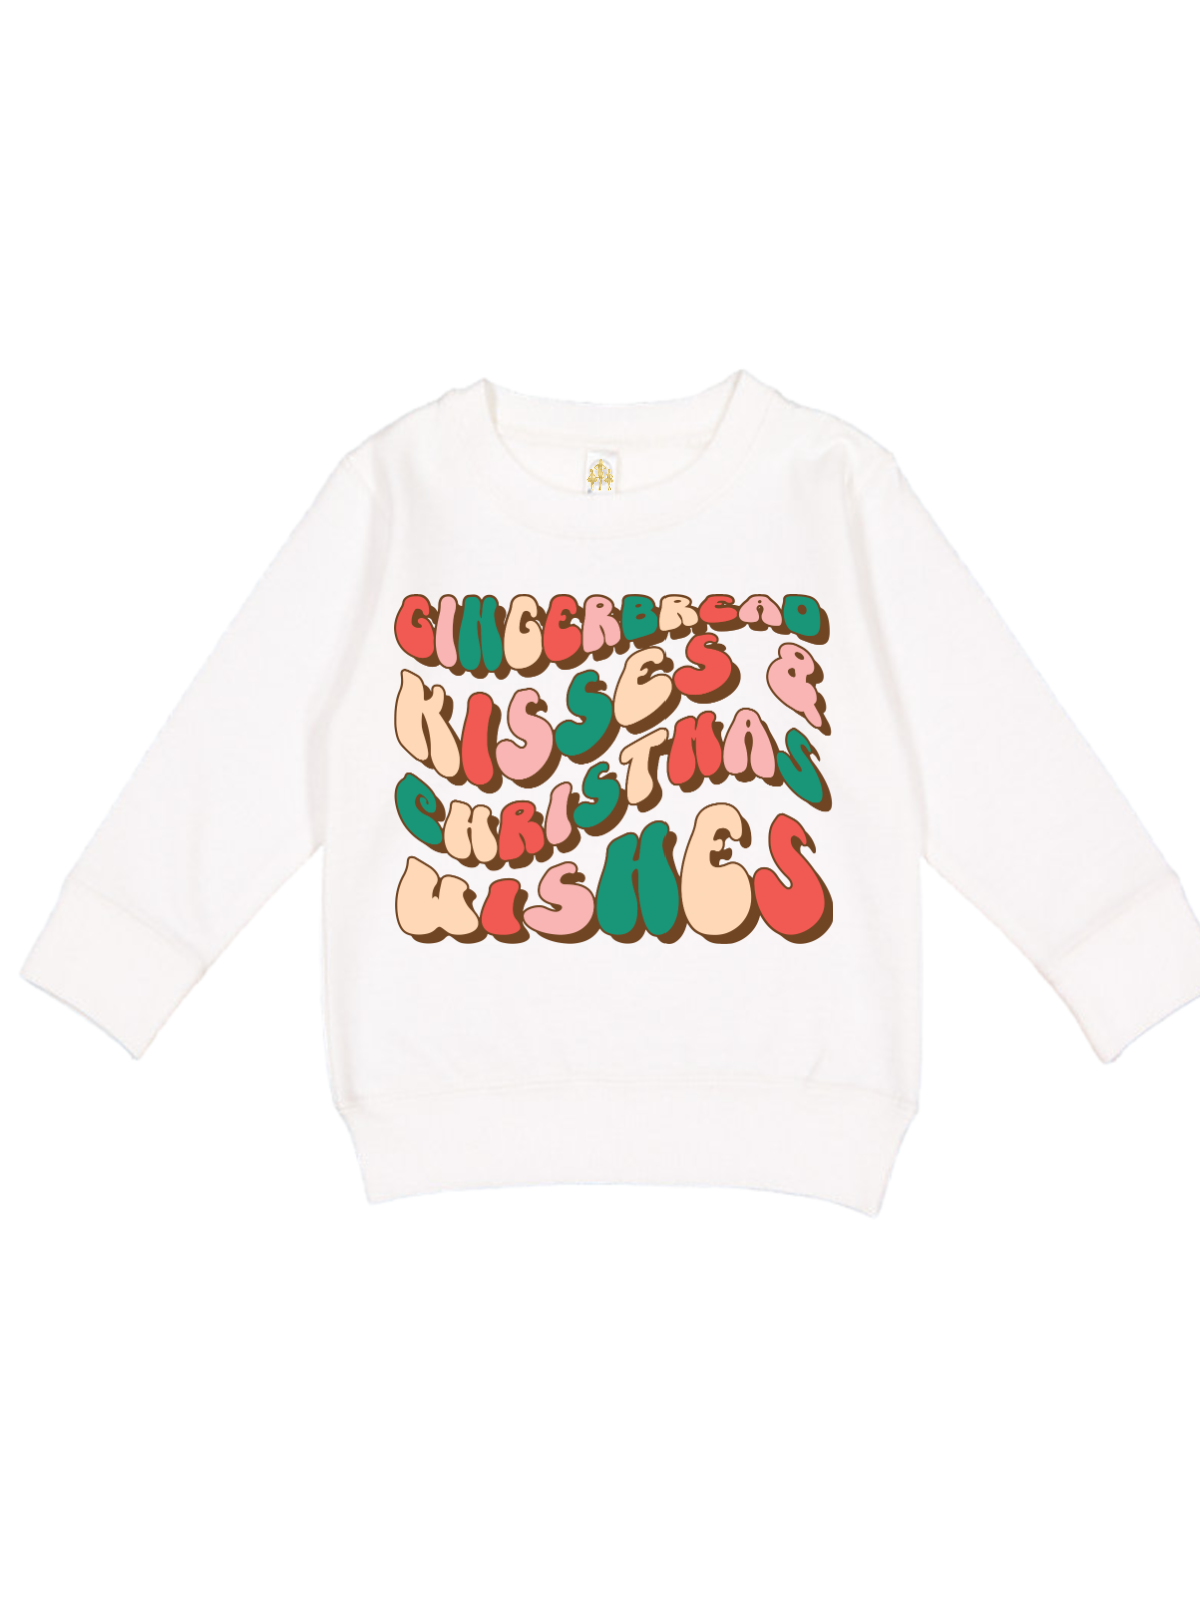 Gingerbread Kisses and Christmas Wishes Kids Holiday Sweatshirt